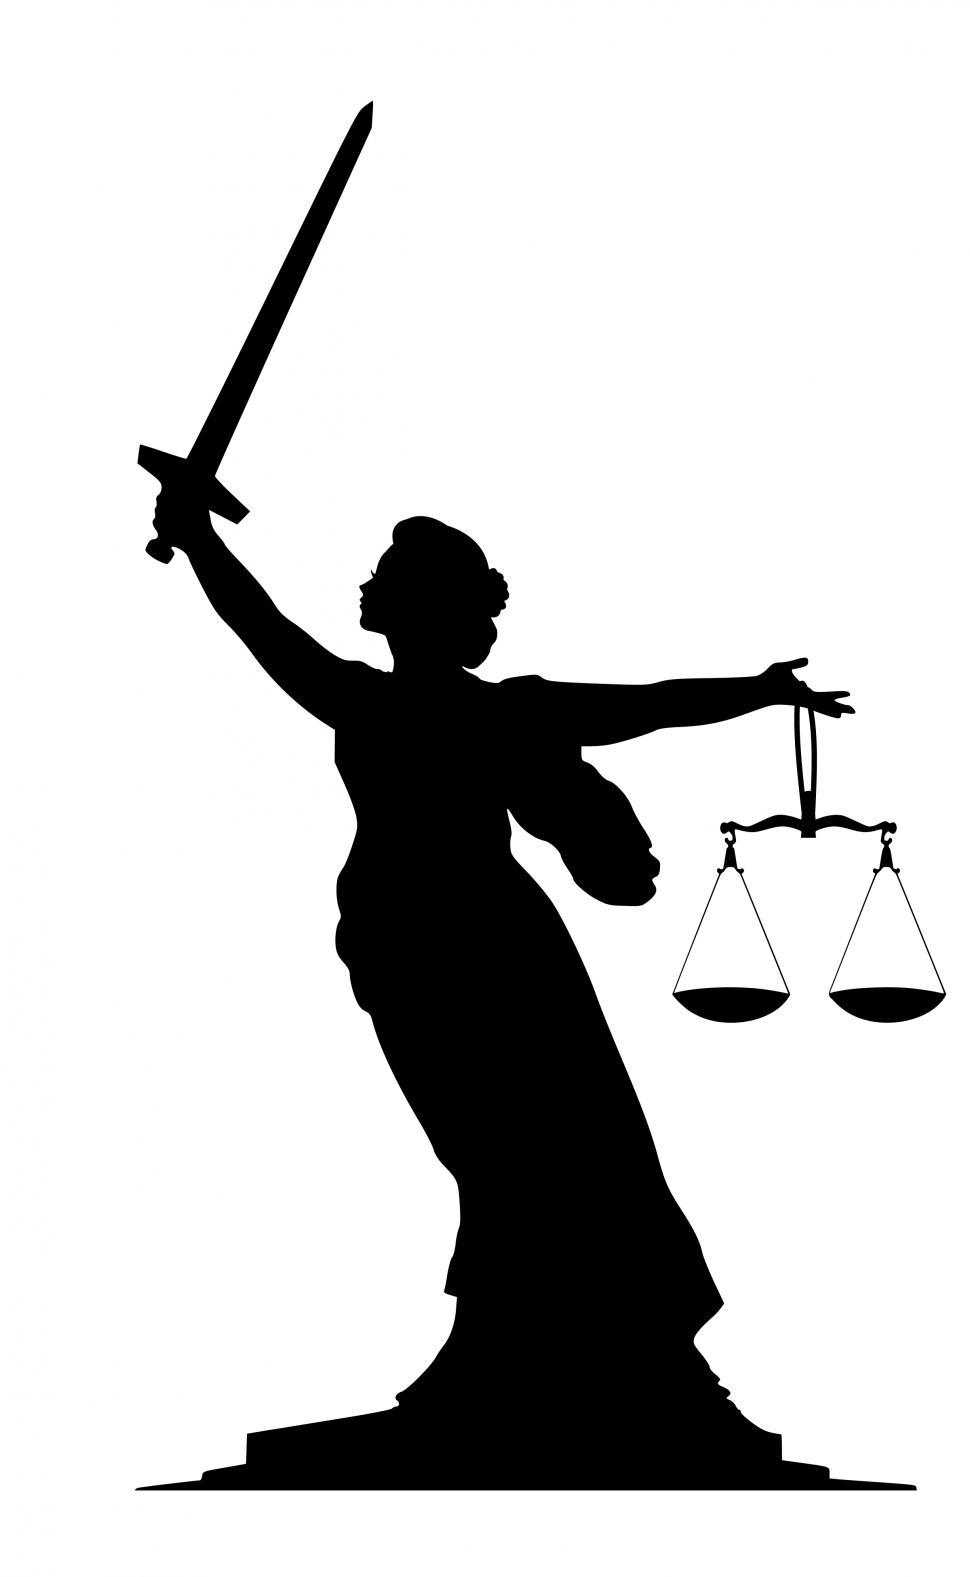 Free Image of lady justice Silhouette  